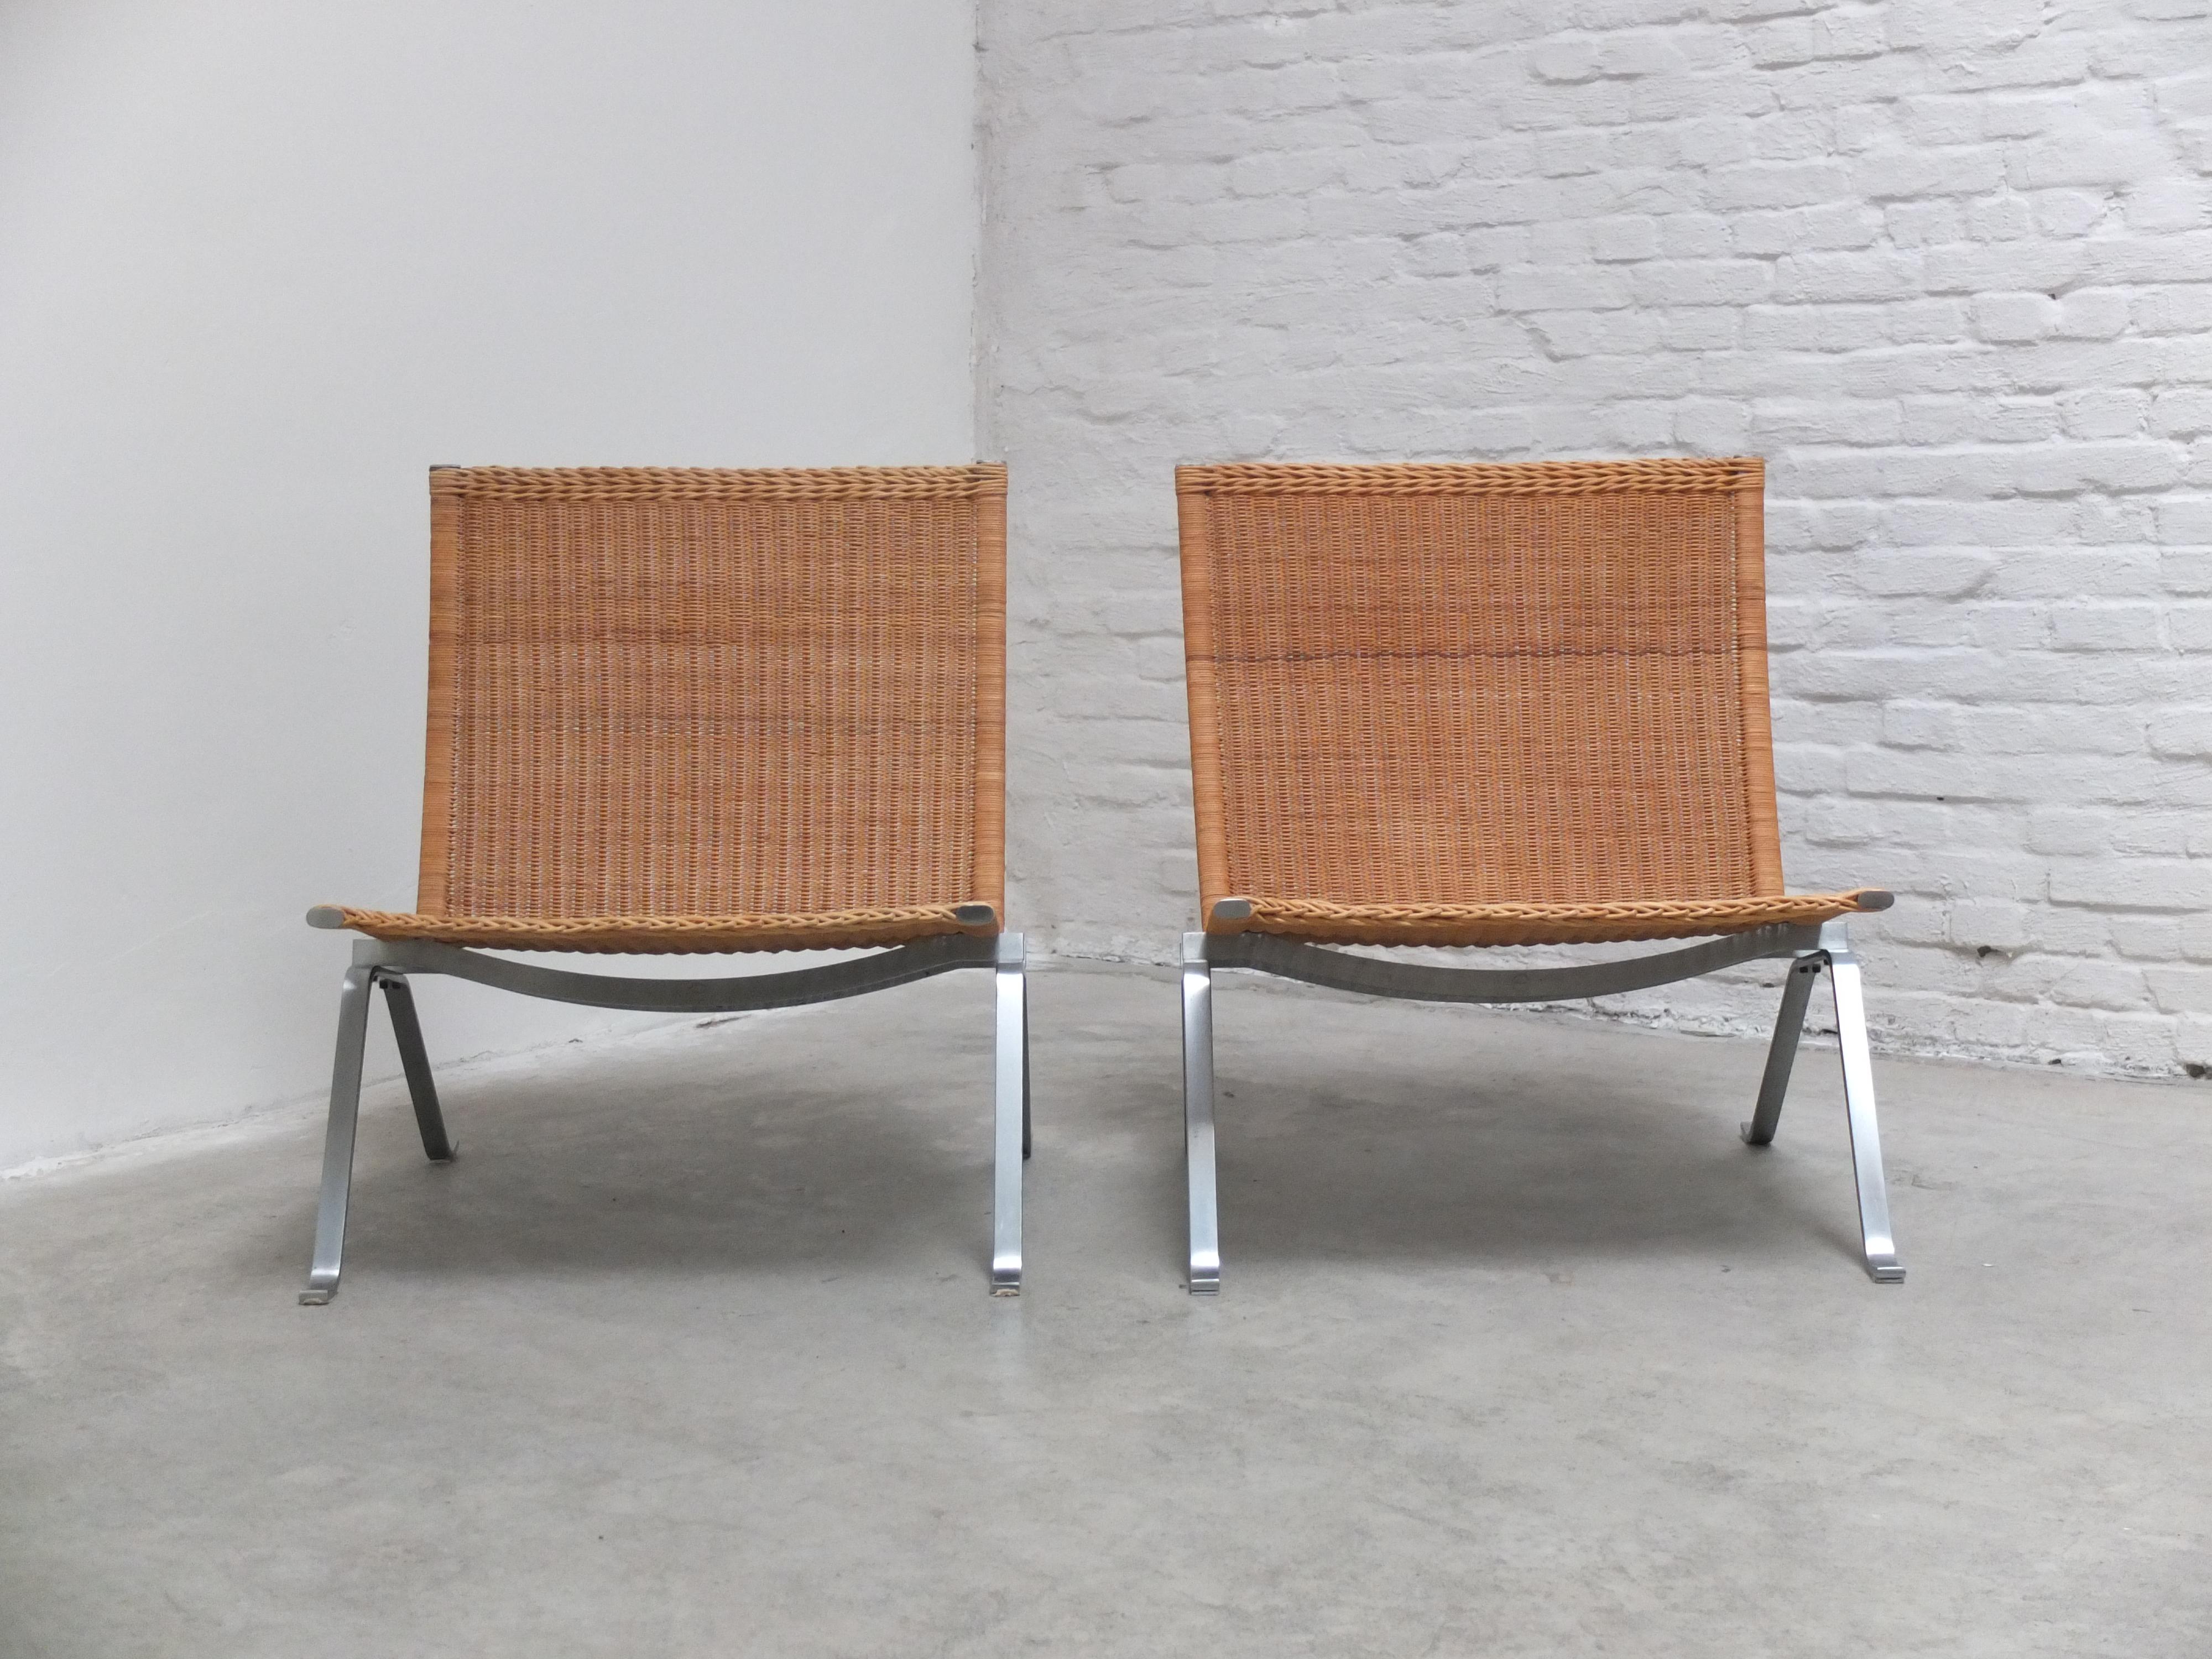 Fantastic pair of ‘PK22’ easy chairs in natural wicker designed by Poul Kjærholm in 1956. This pair comes with the original cane seats with a great patina thanks to age and use after almost 40 years. These chairs are among the first productions by